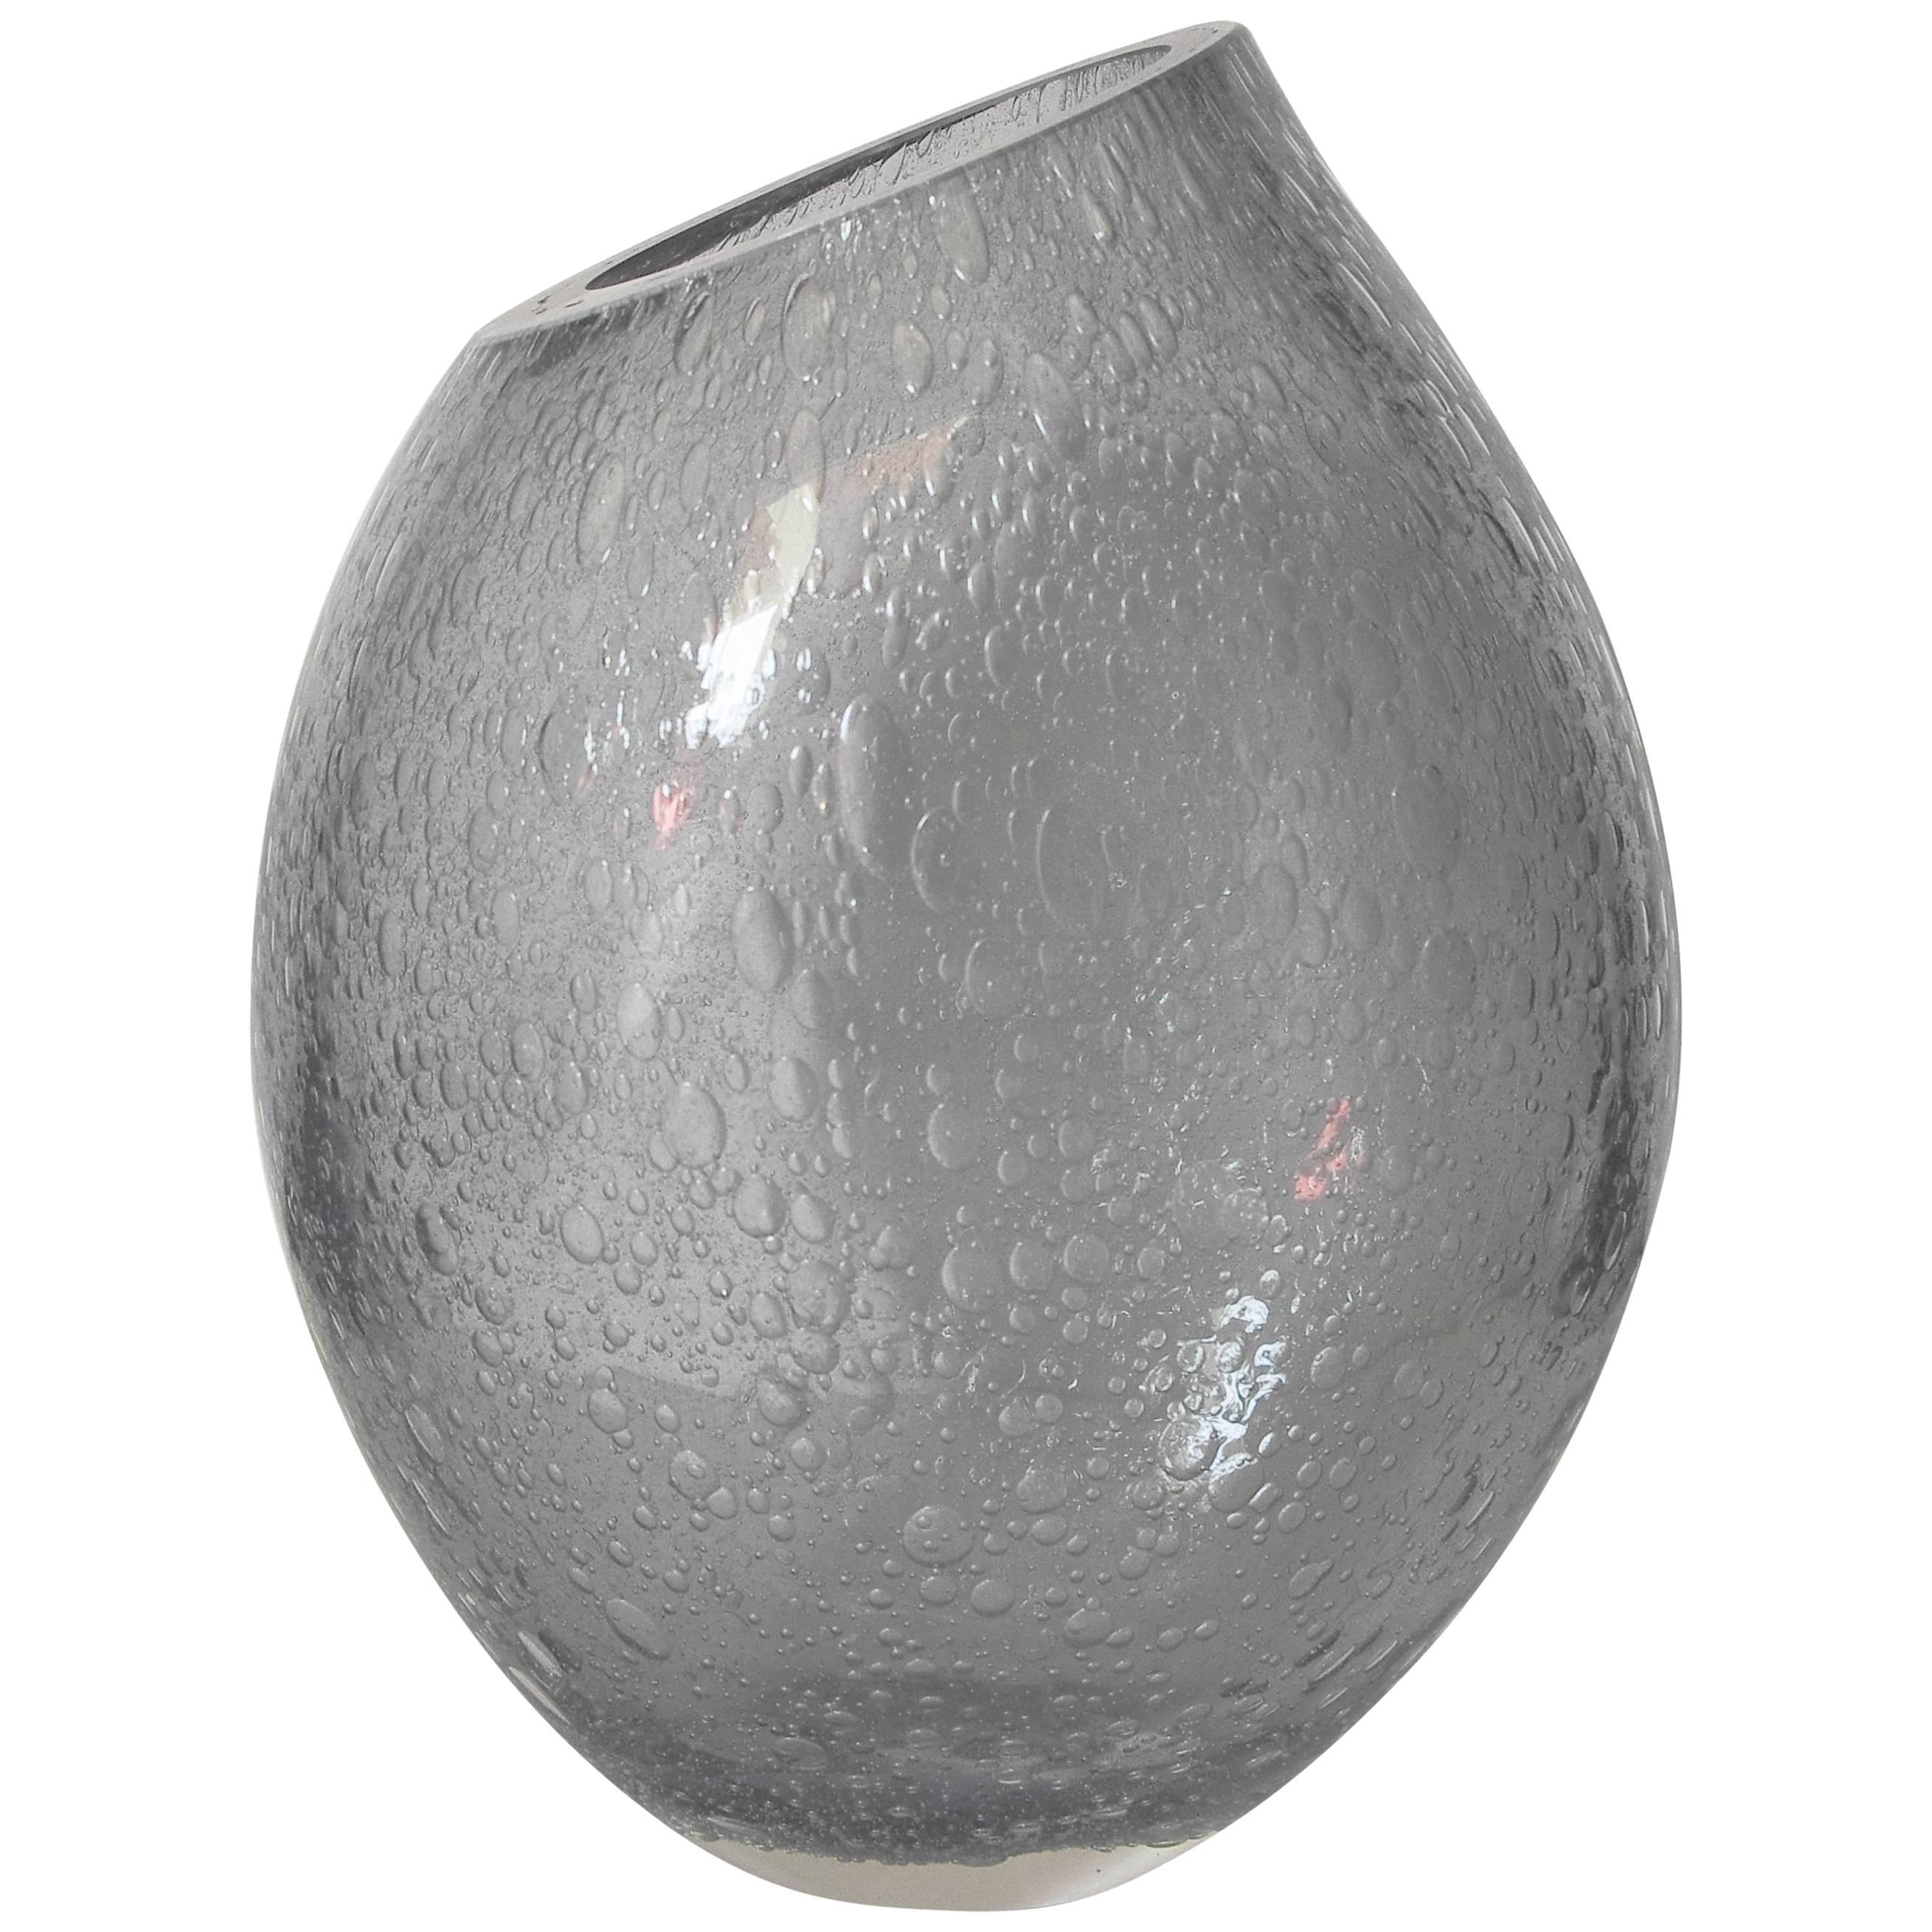 Italian vase or sculpture in thick smoky gray Murano glass blown with bubbles within the glass in Pulegoso technique by Alberto Dona for Fabio Ltd
Signature engraved on the base / Made in Italy
Measures: Height 13.5 inches / width 9.5 inches / depth